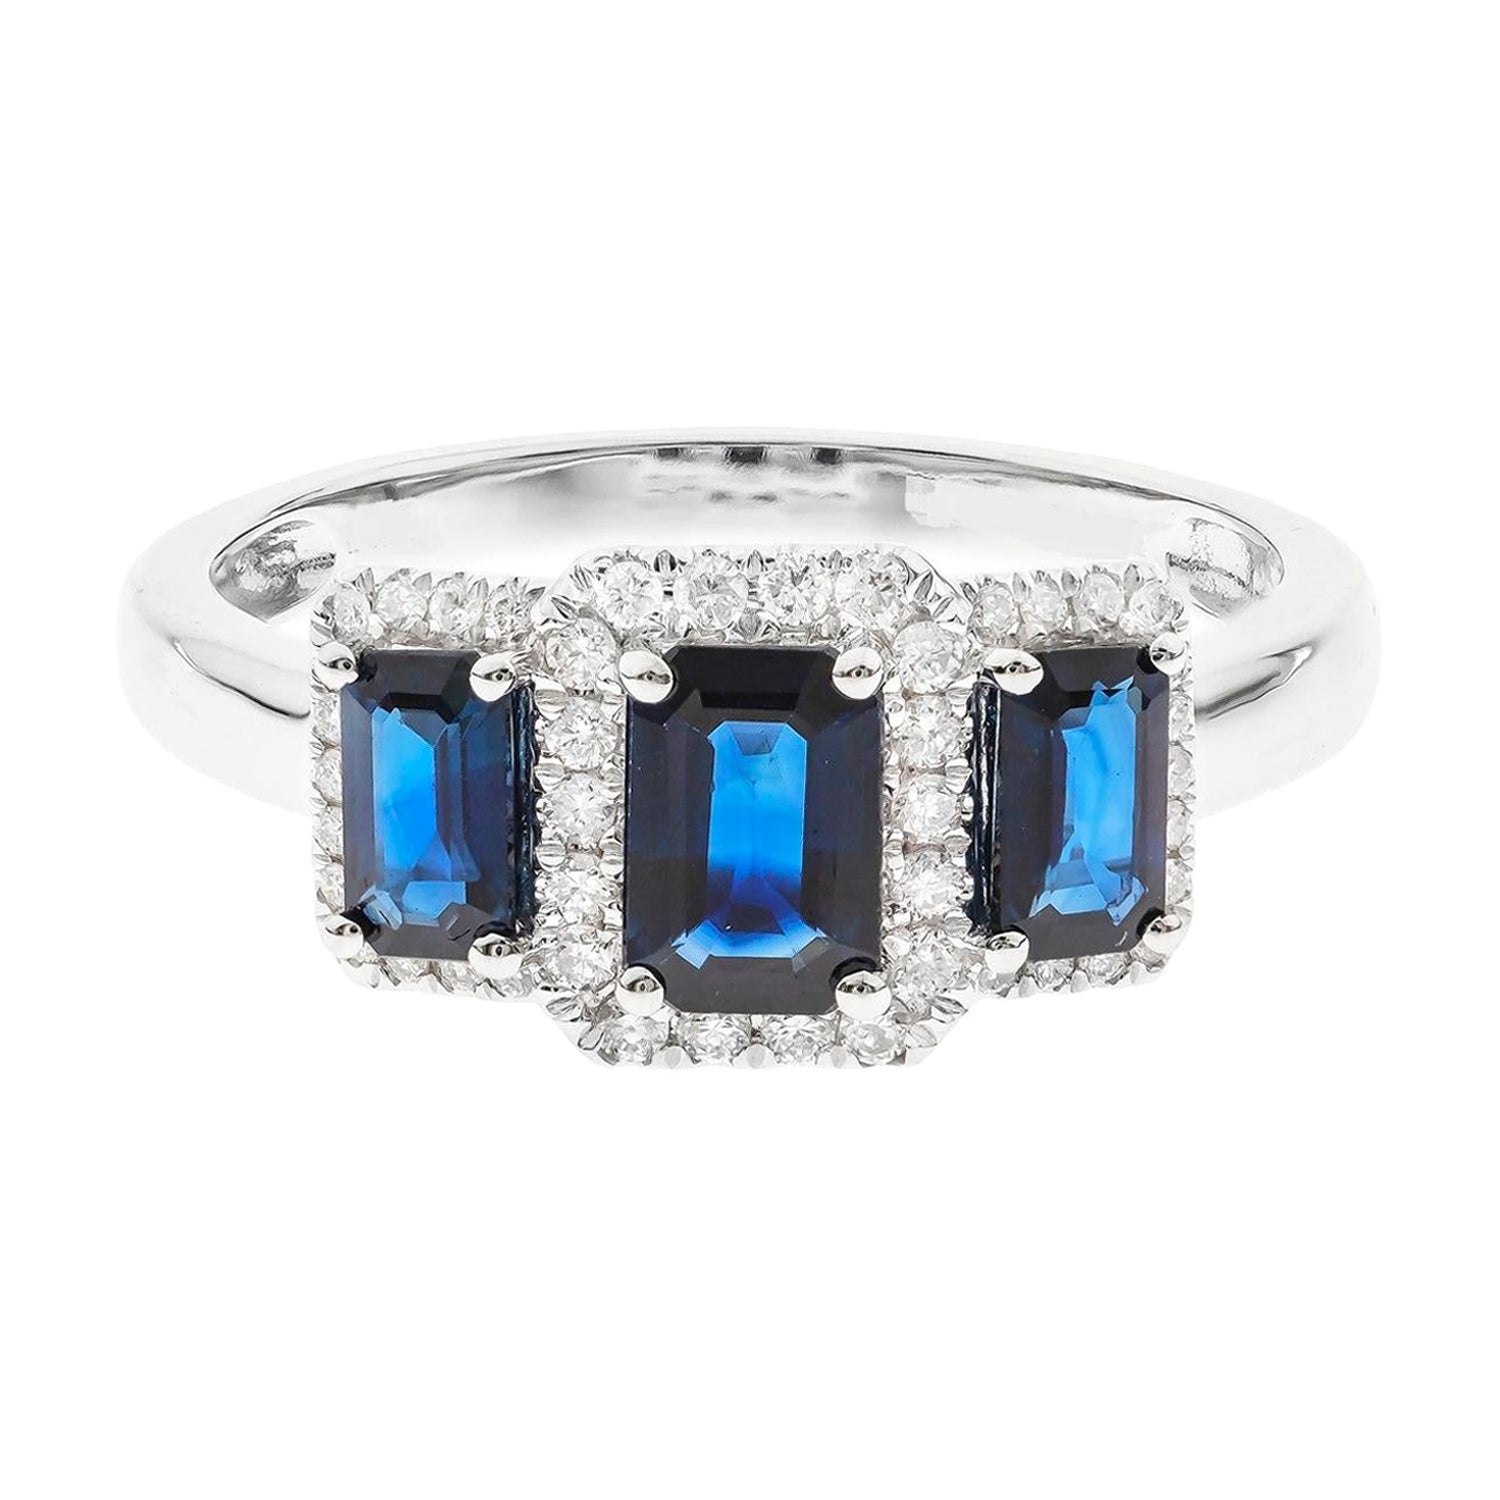 1.31 Carat Emerald-Cut Blue Sapphire with Diamond Accents 14K White Gold Ring For Sale